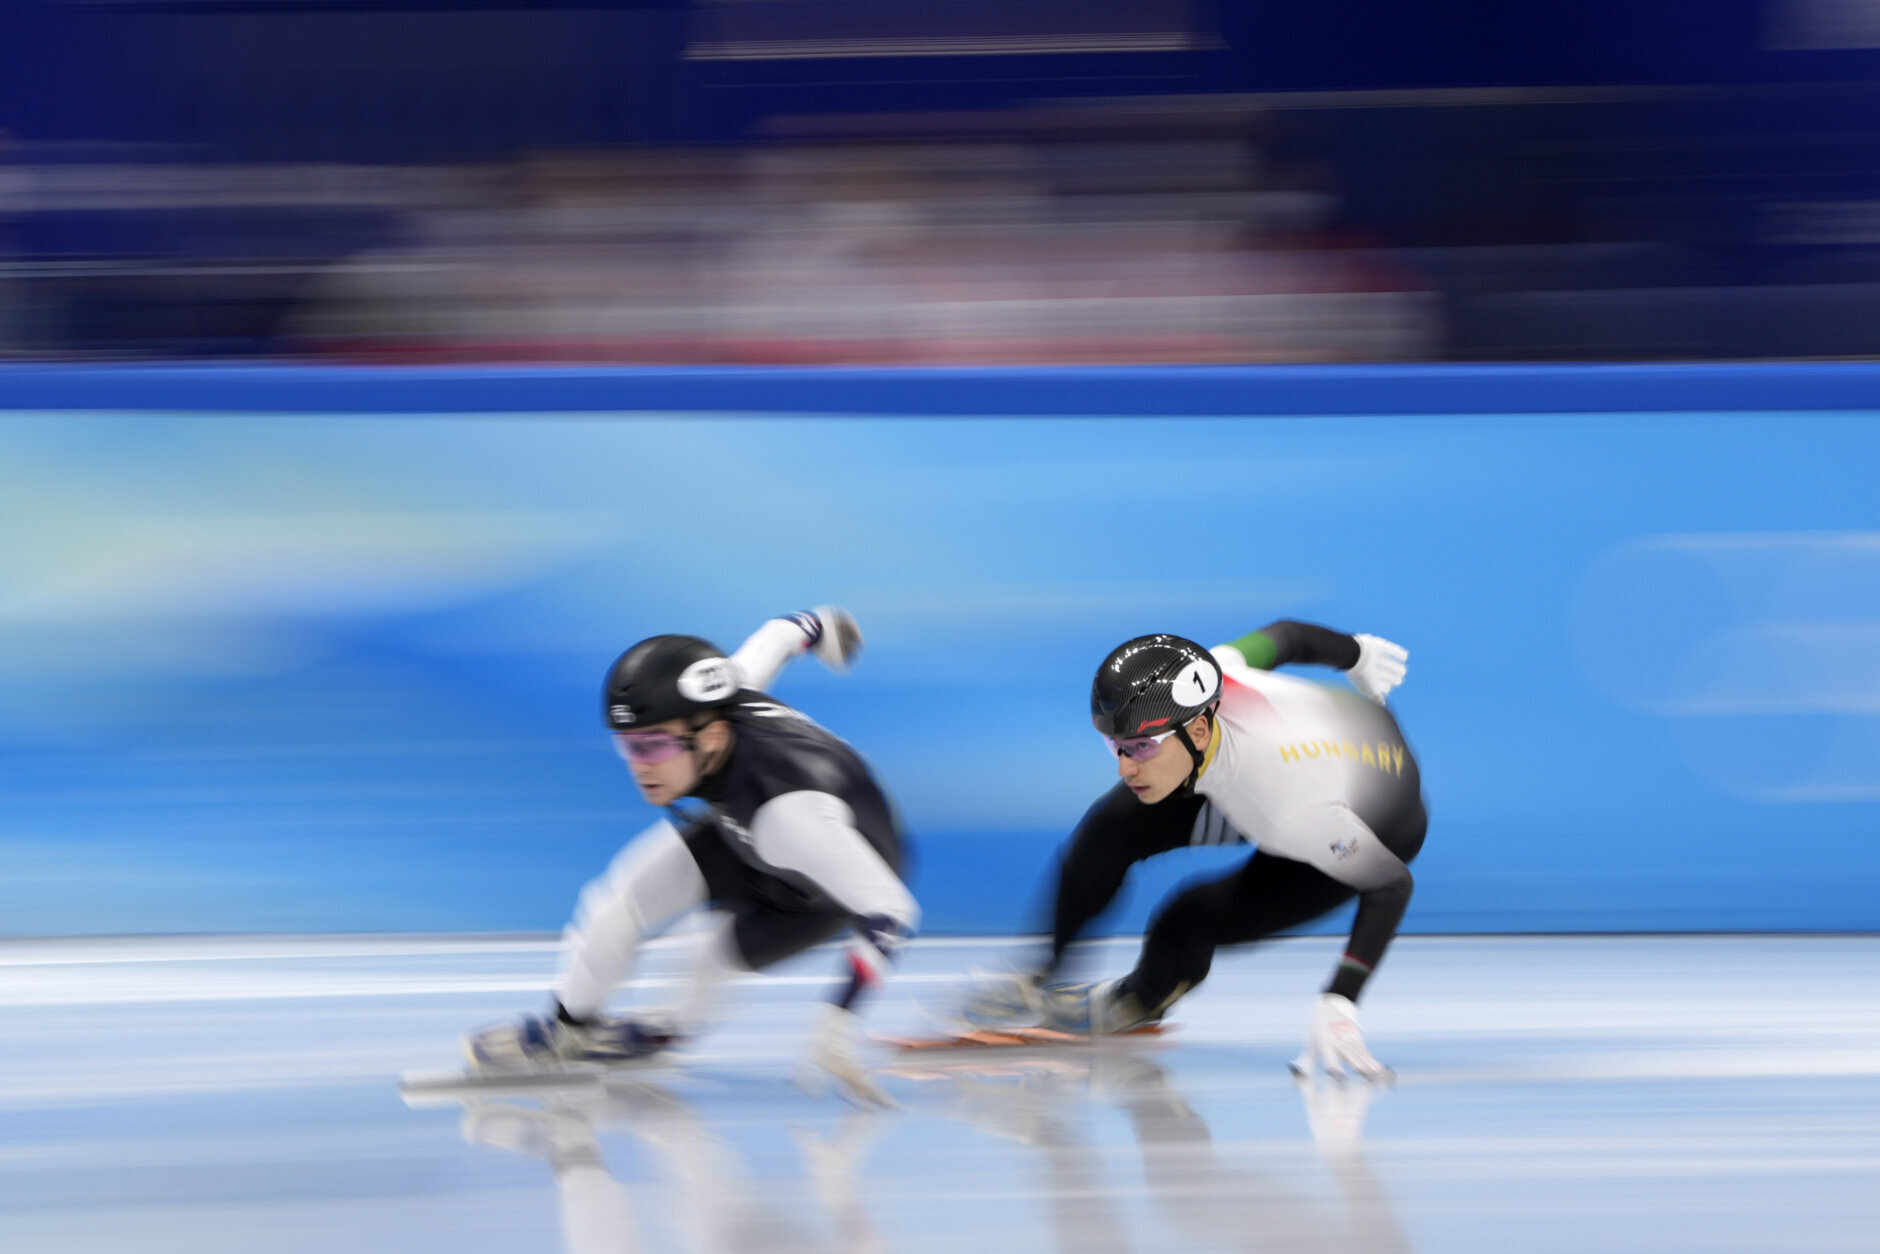 Andrew Heo, left, of the United States and Liu Shaoang of Hungary race in the mixed team relay semifinal during the short track speedskating competition at the 2022 Winter Olympics, Saturday, Feb. 5, 2022, in Beijing. (AP Photo/Natacha Pisarenko)